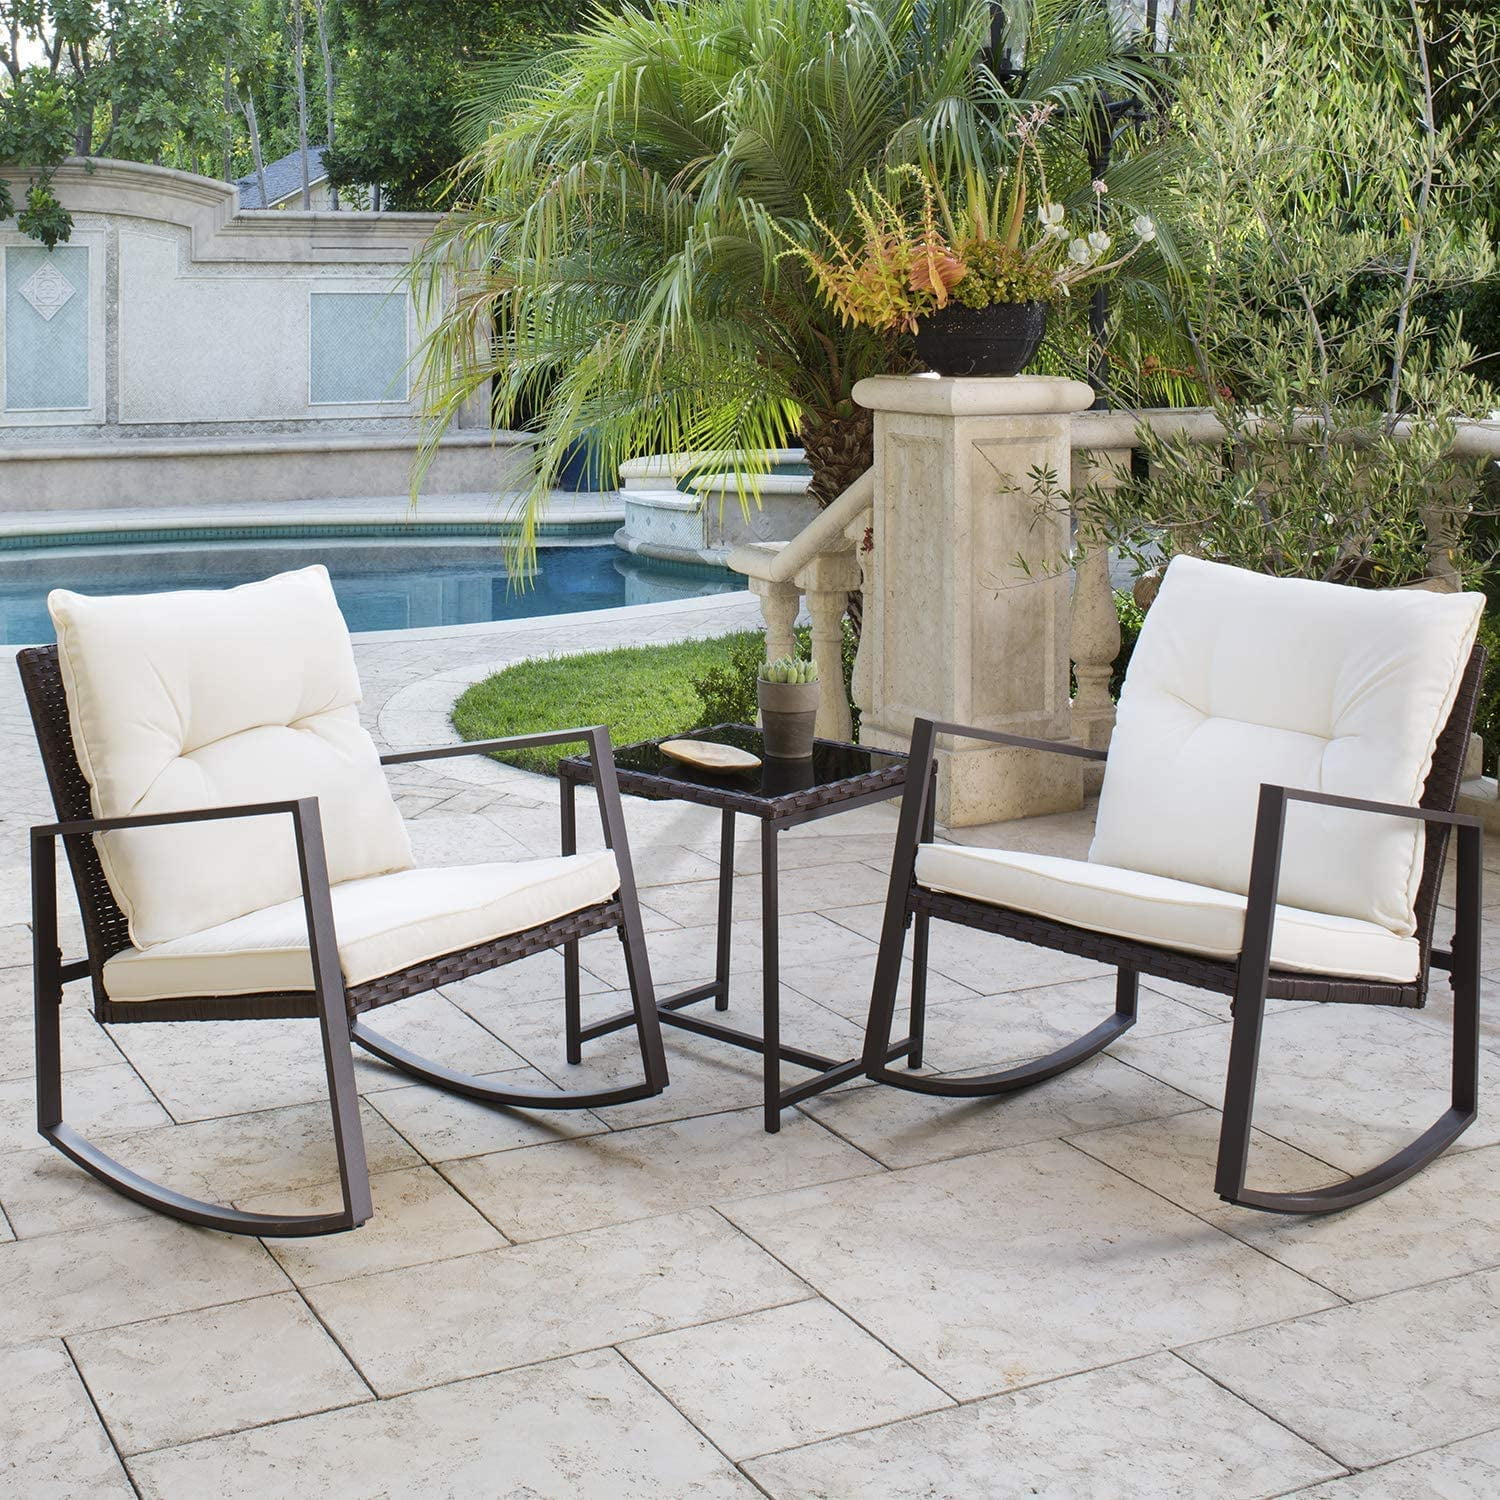 Oakmont 3 Pieces Patio Furniture Set Outdoor Wicker Conversation Set Modern Bistro Set Black Rattan Balcony Chair Sets with Coffee Table for Yard and Bistro Beige 